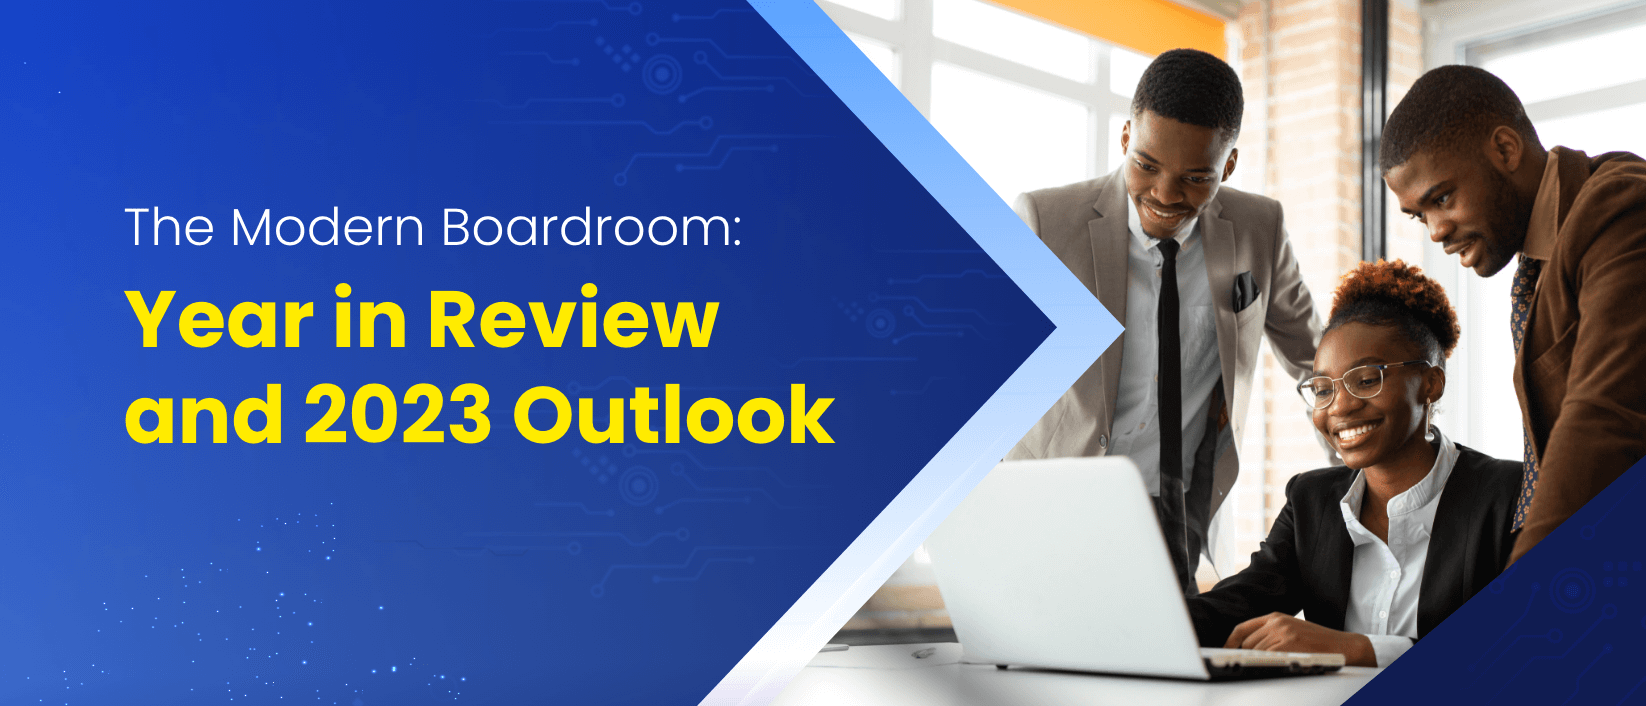 The Modern Boardroom: Year in Review and 2023 Outlook